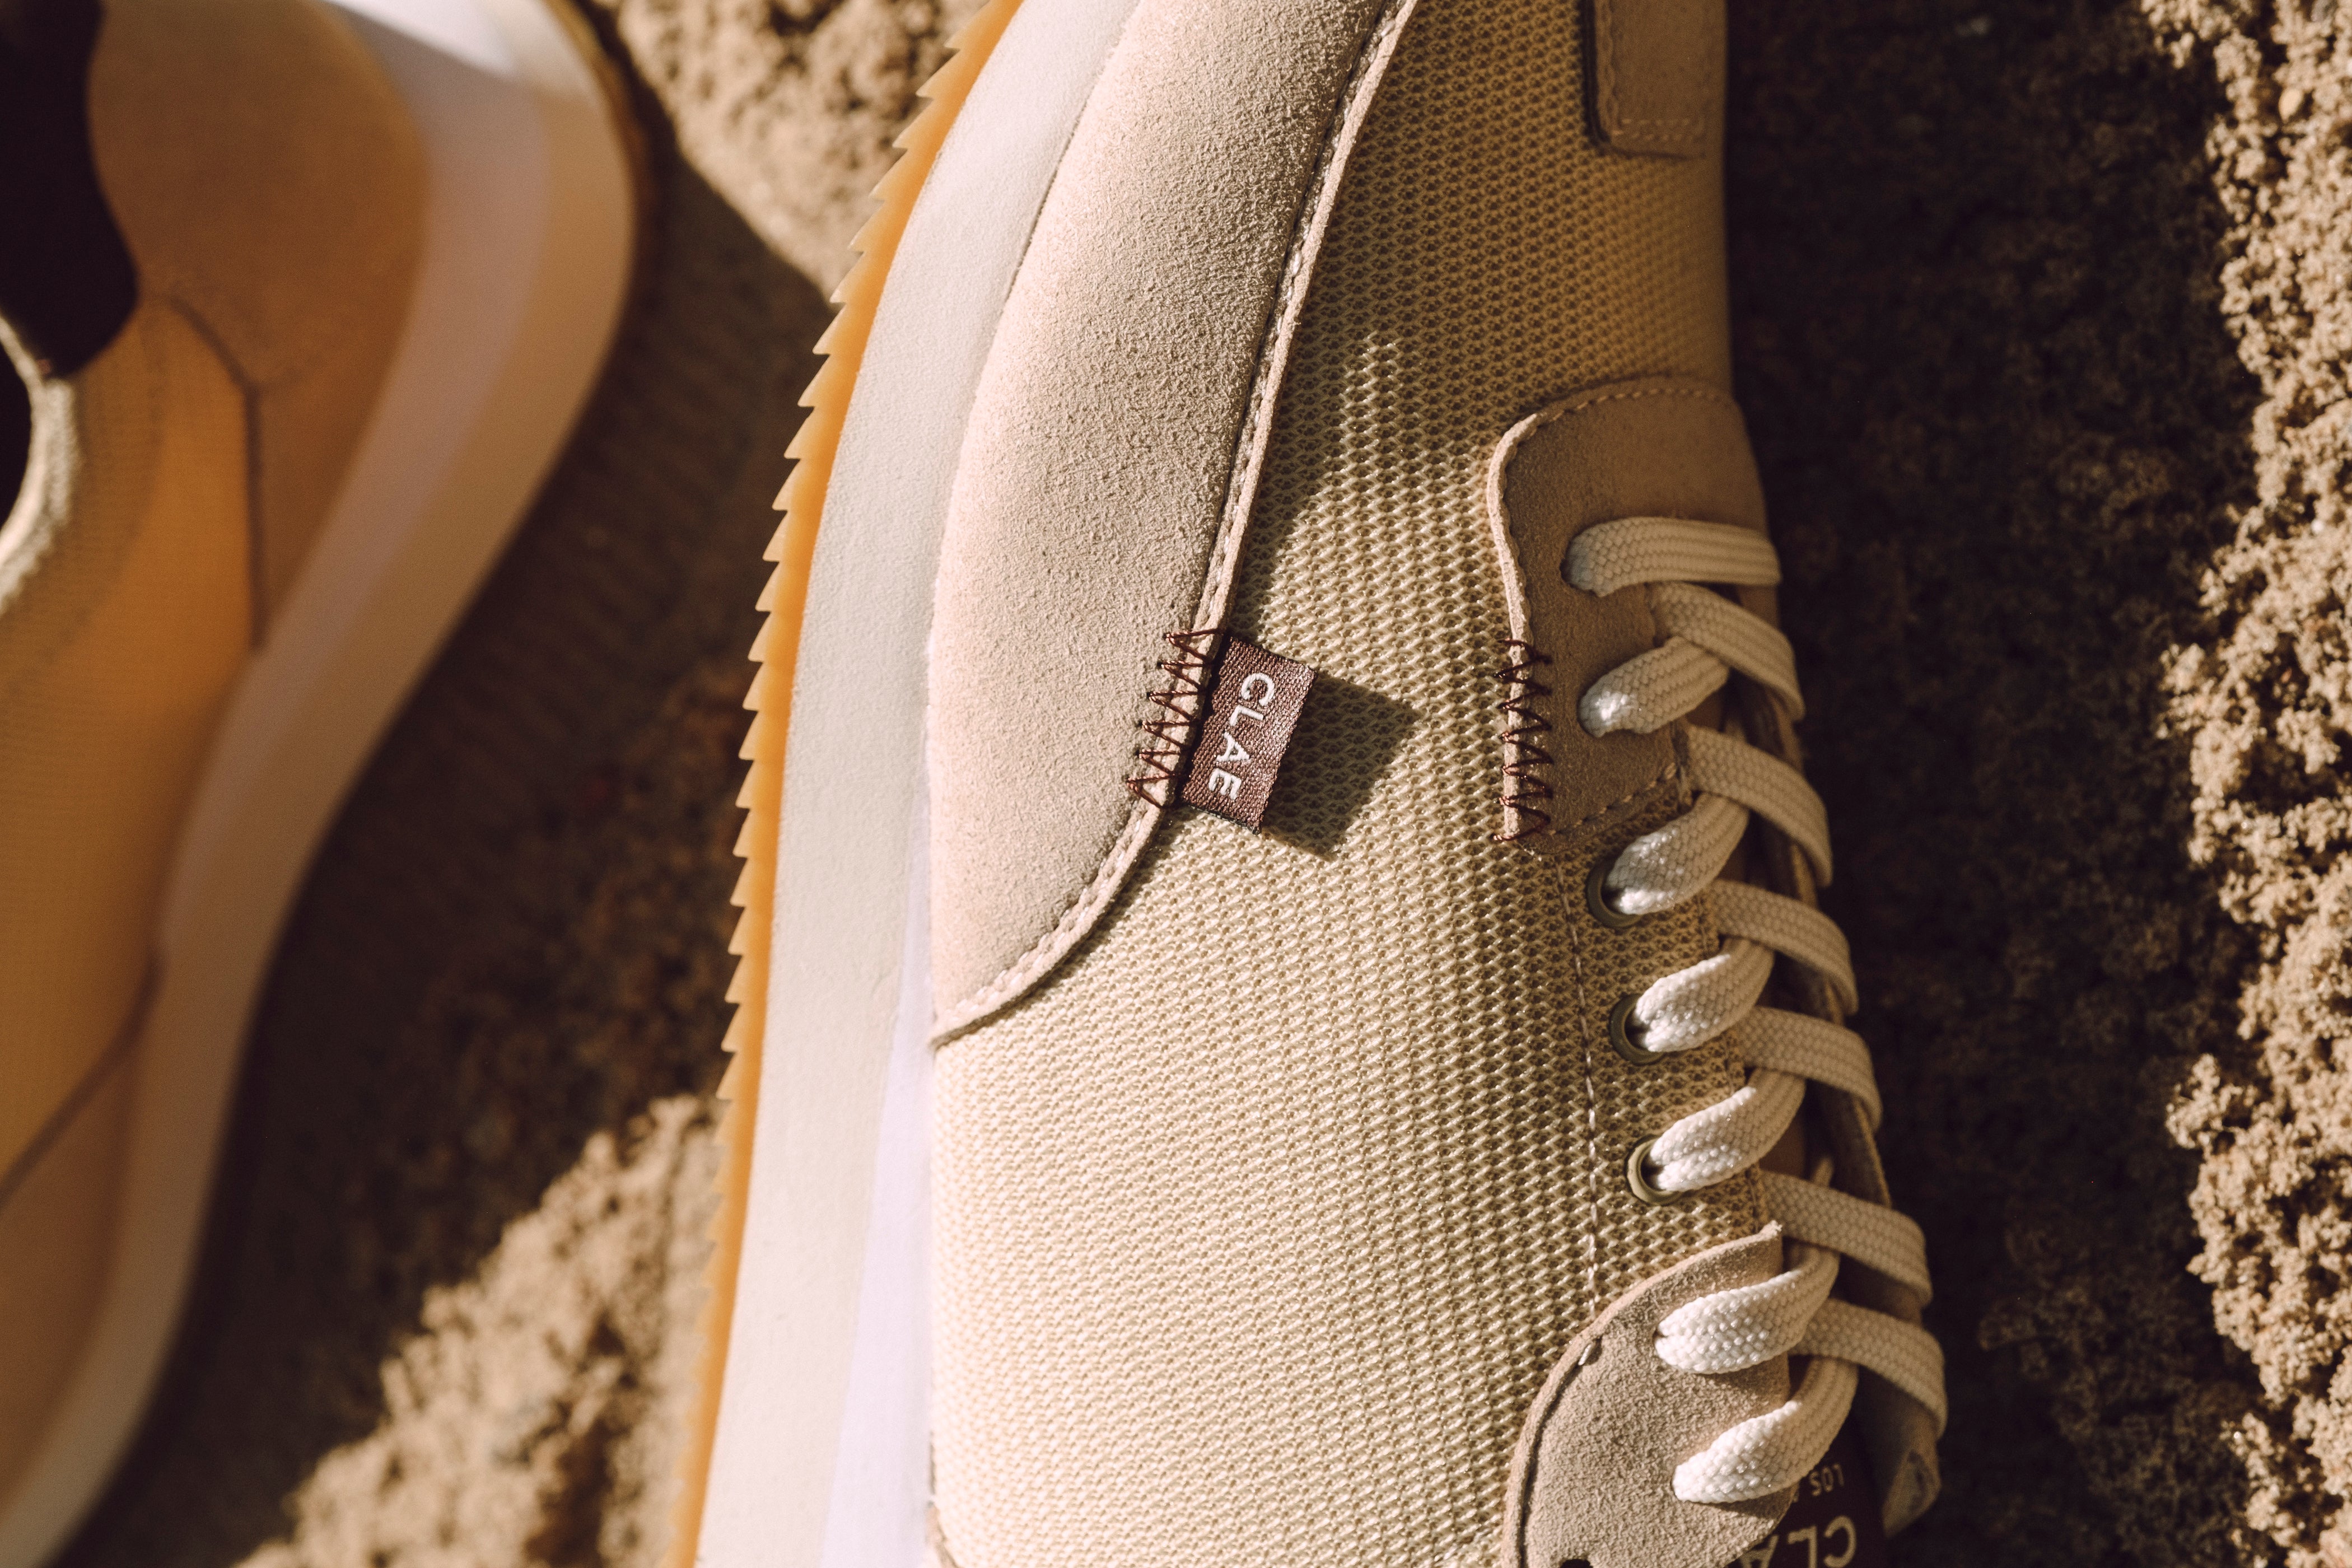 refined vintage runnning shoes hadncrafted with lightweight recycled fabric by CLAE los Angeles